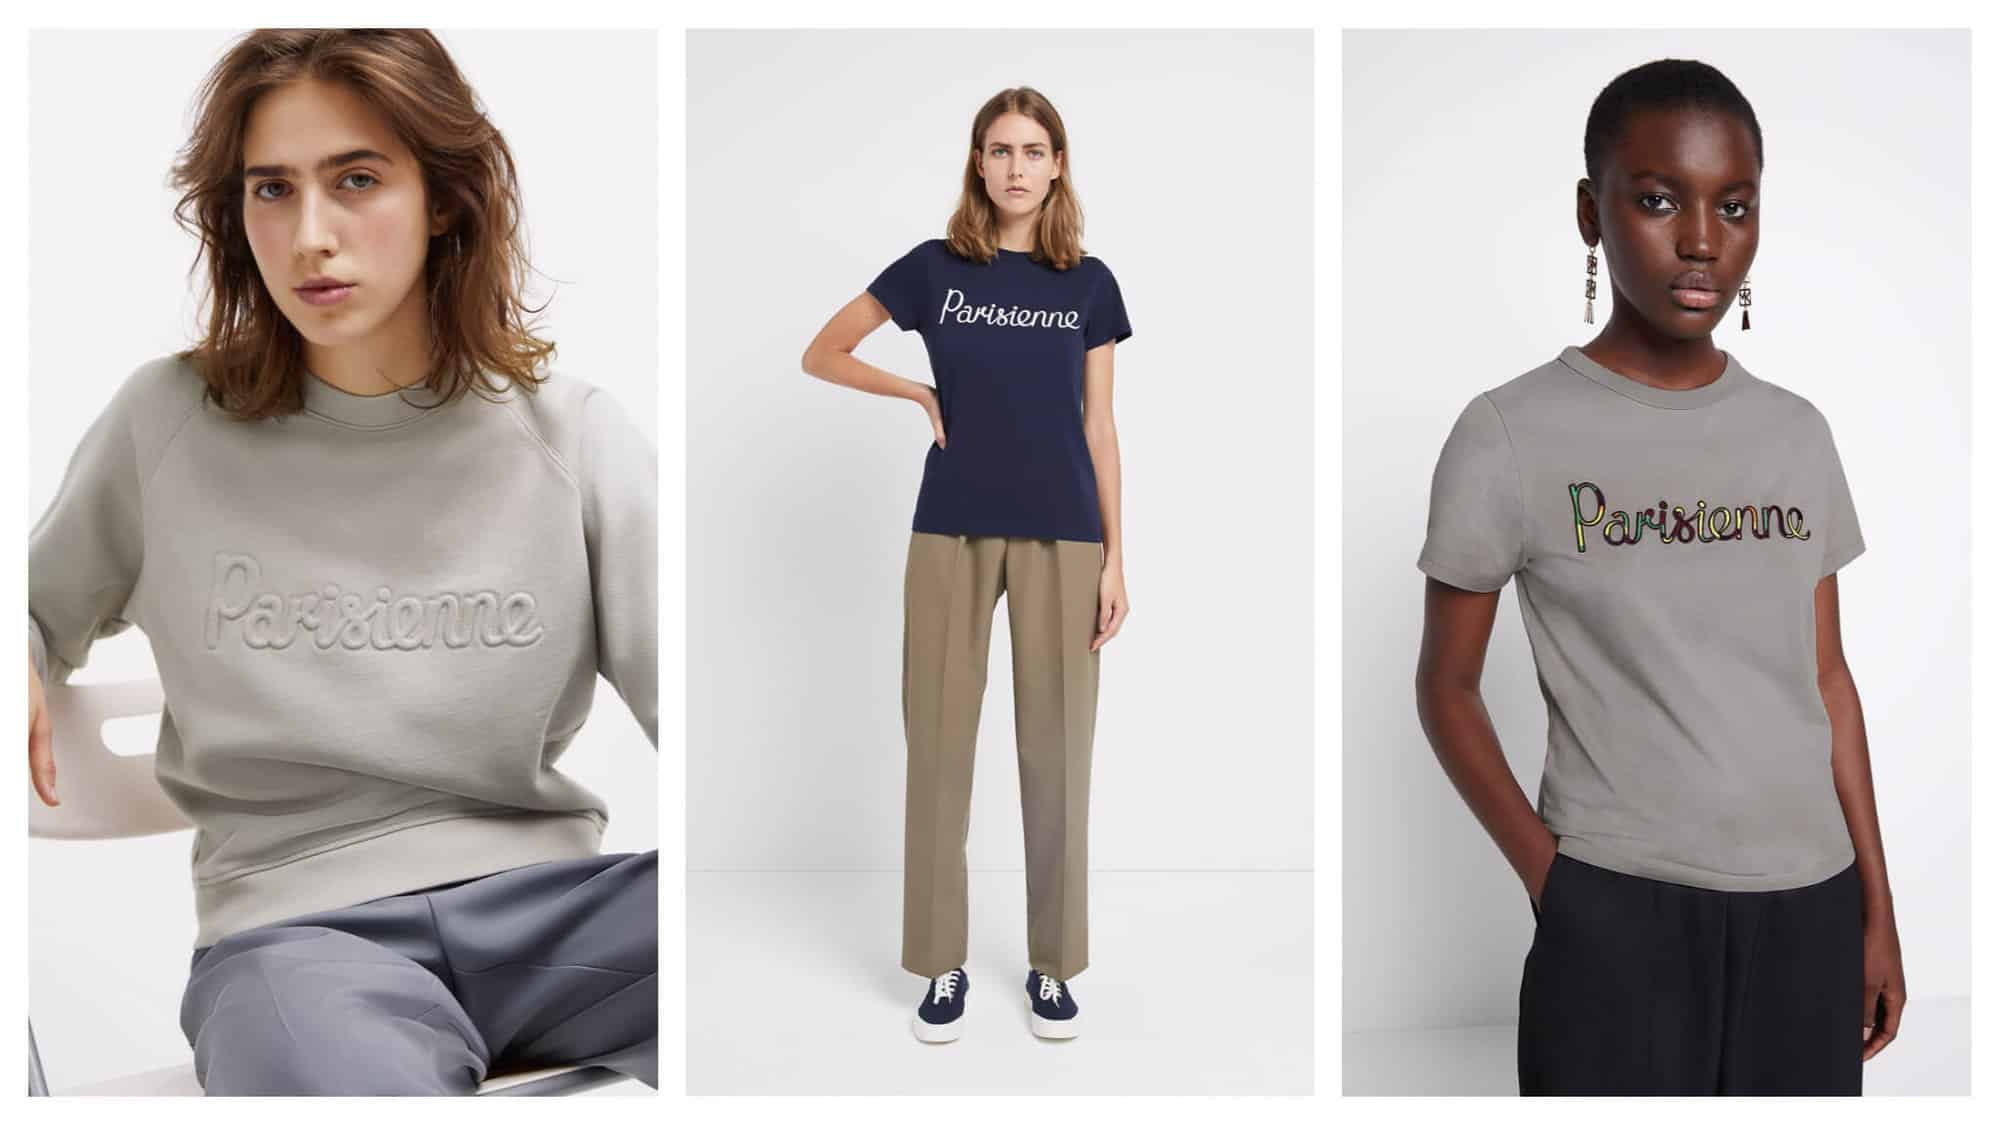 Left: a woman with shoulder length brown hair, grey trousers and a lighter greay sweatshirt sits on a white. Center: a woman with dirty blond shoulder length hair, a short sleeved dark blue t-shirt and beige trousers stands against a white background. Right: a woman black woman with short black hair stands against a white background wearing black trousers and a short-sleeved grey t shirt. Each of their shirts say 'Parisienne'.